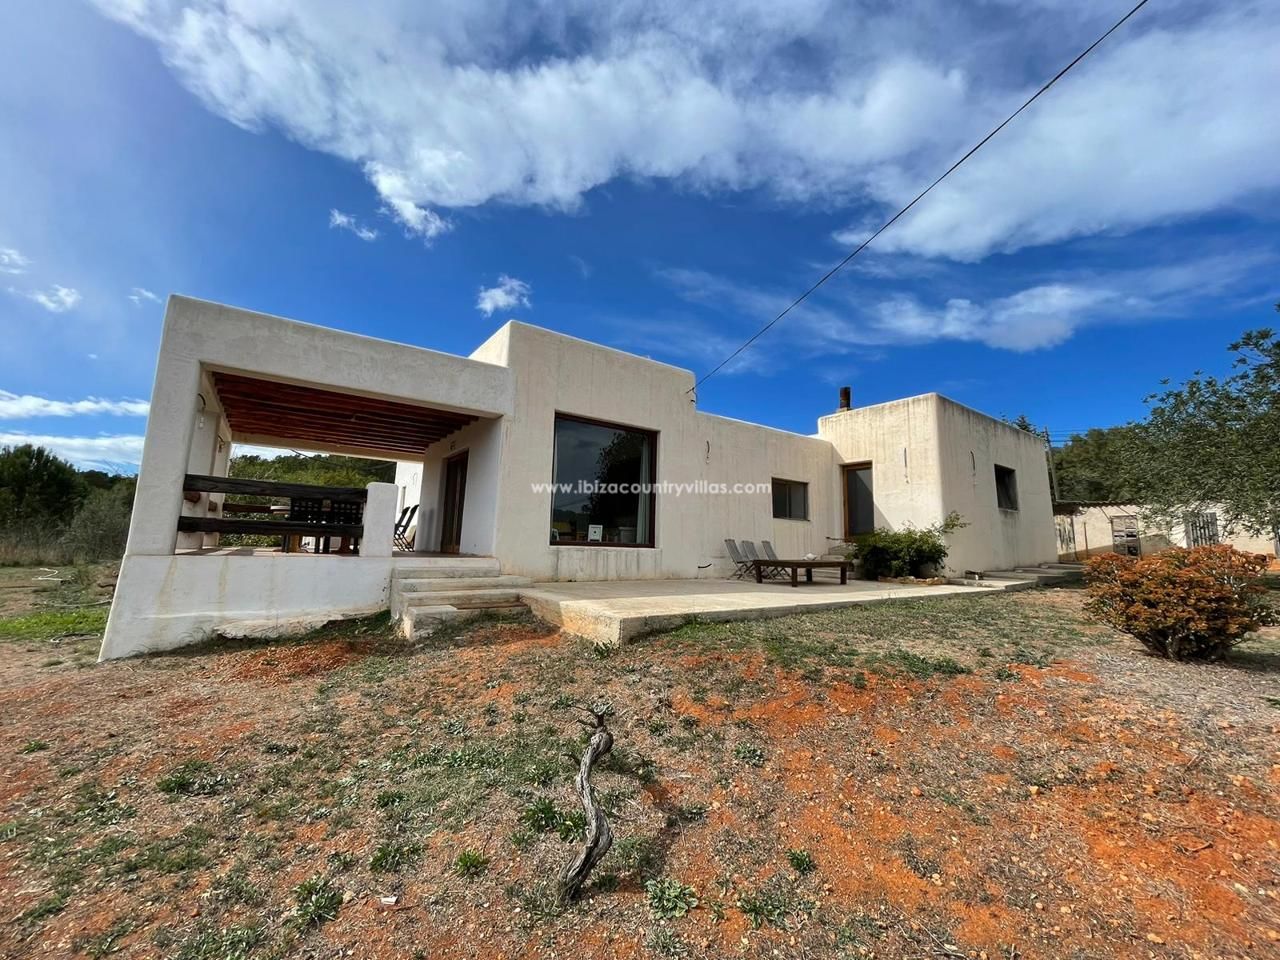 House with a lot of potential and a large plot of land near Santa Gertrudis